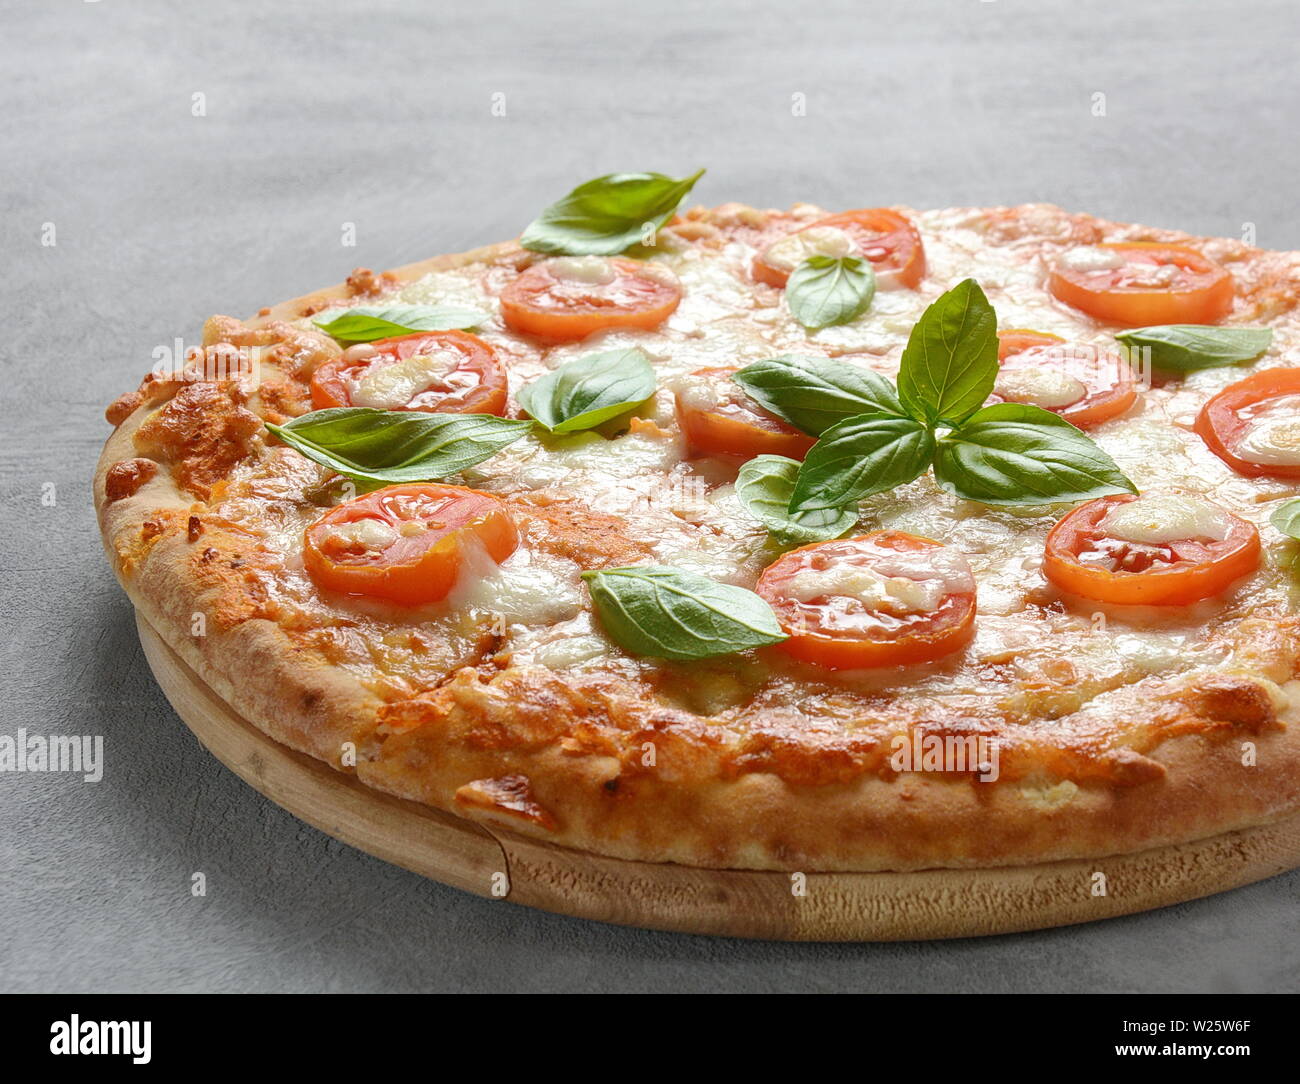 Homemade Italian Neapolitan pizza Margherita with melted mozzarella cheese and tomatoes garnished with fresh basil Stock Photo